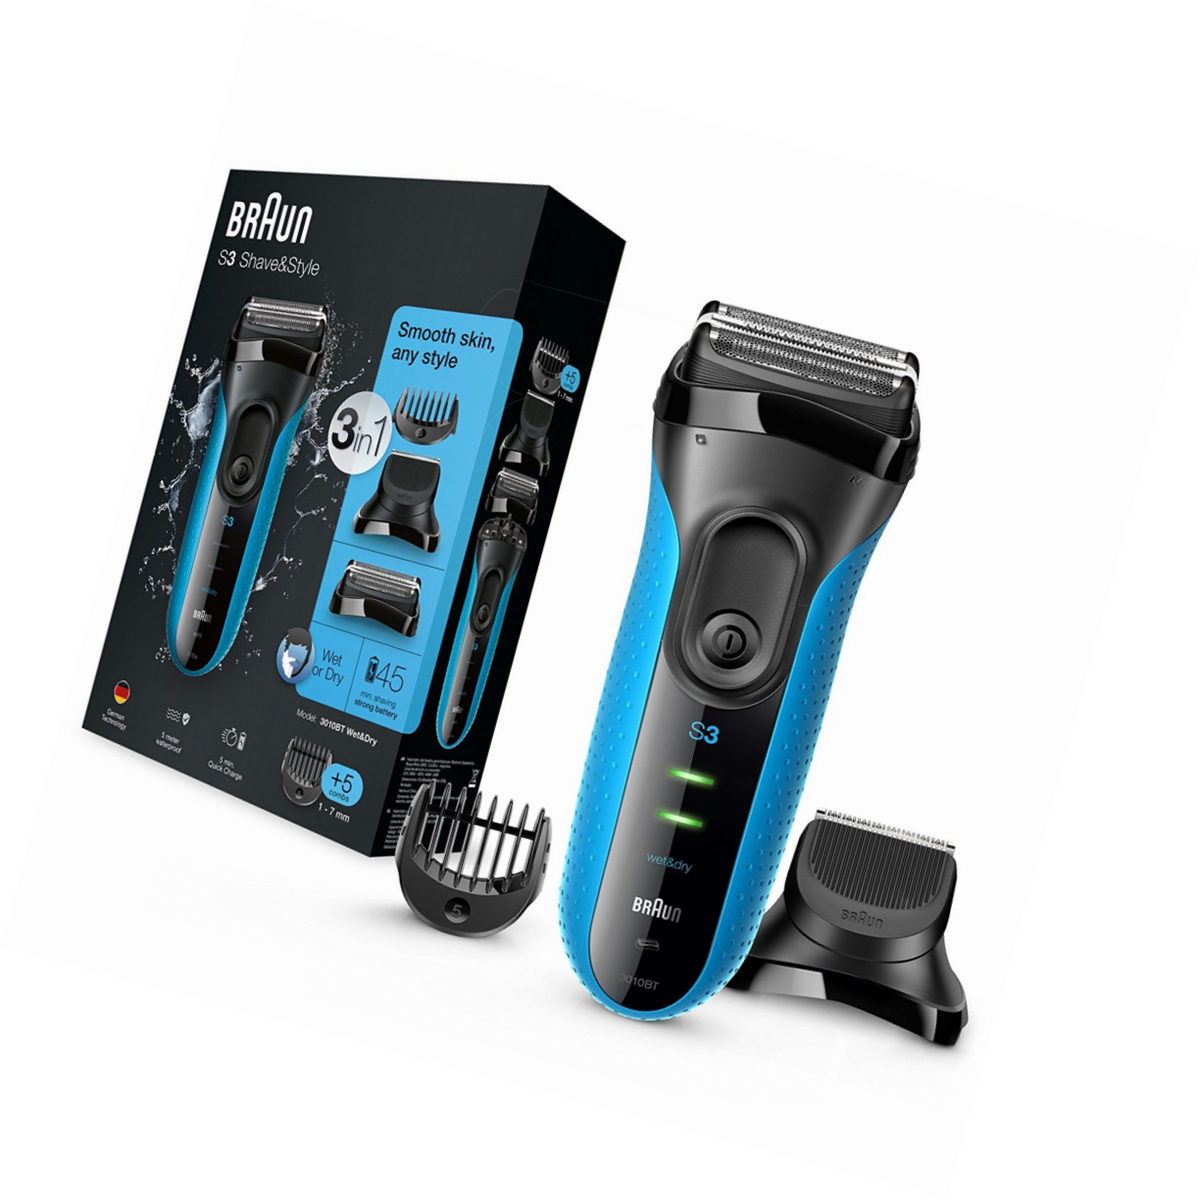 Series 3 Shave & Style 3 in 1 Shaver (3010BT)